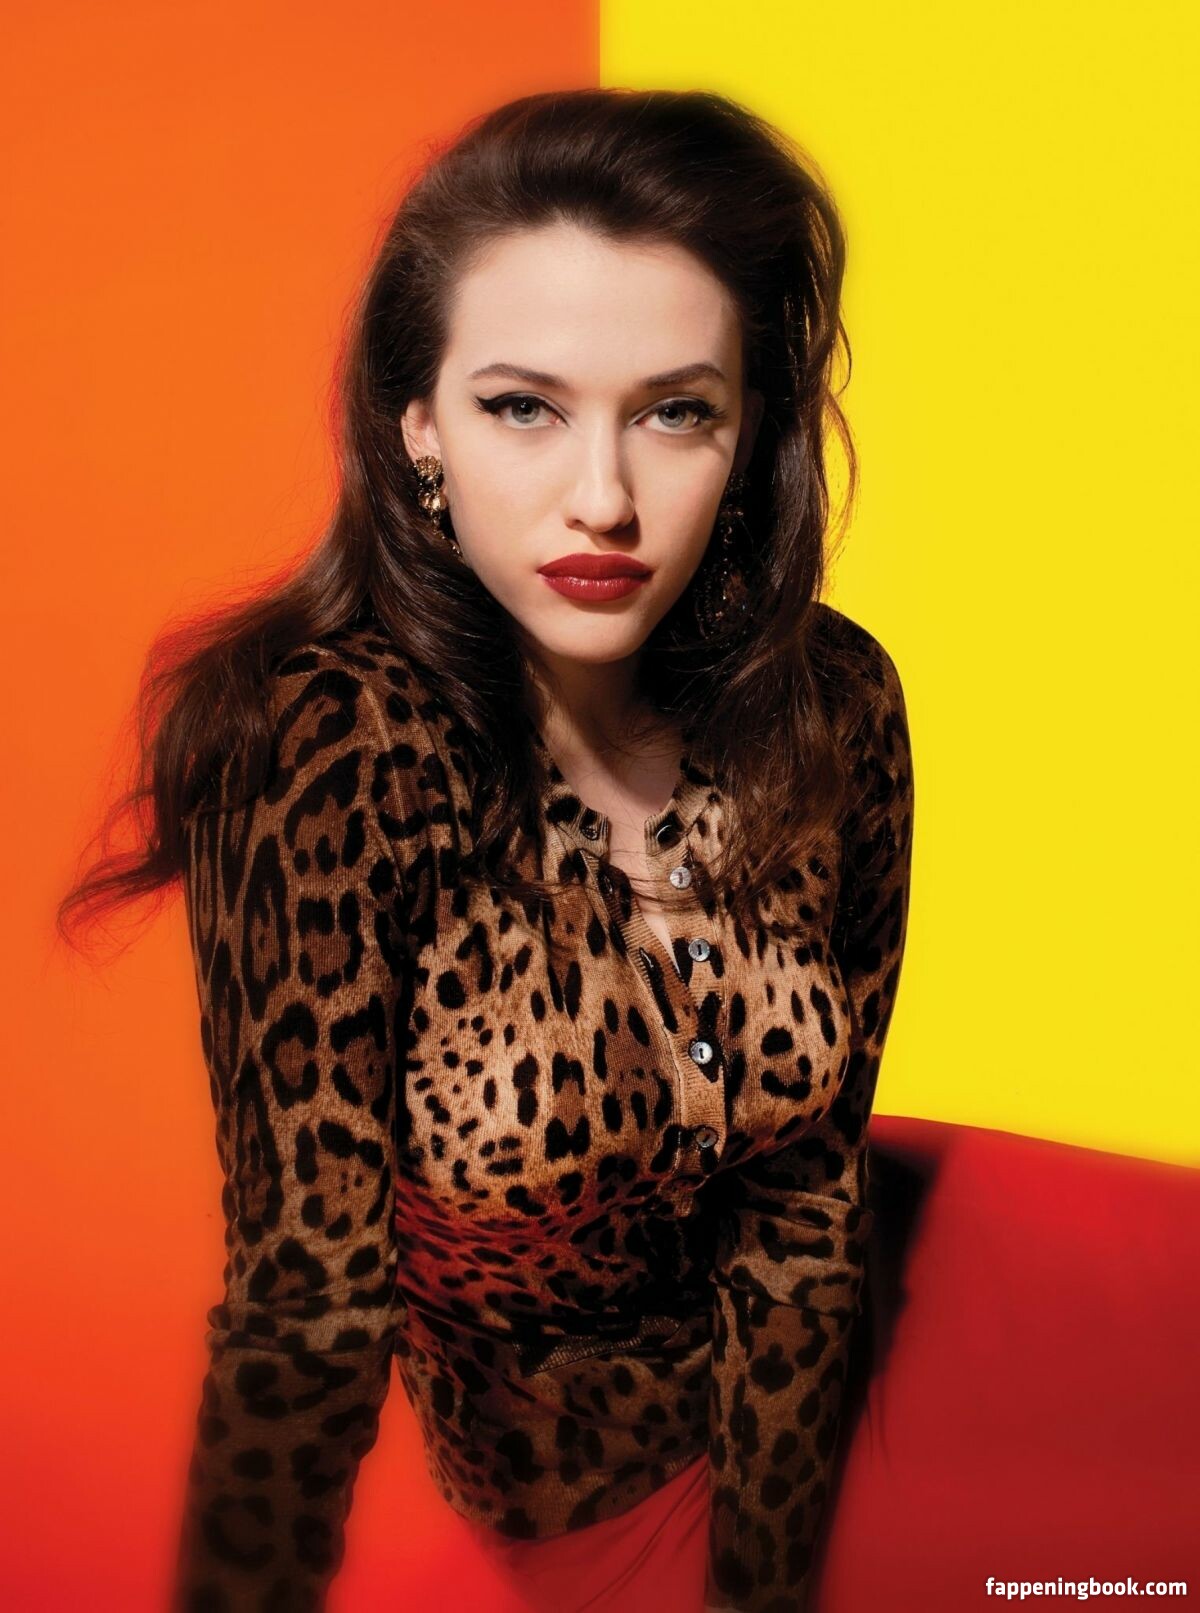 Kat Dennings Nude The Fappening Photo 2425921 Fappeningbook 